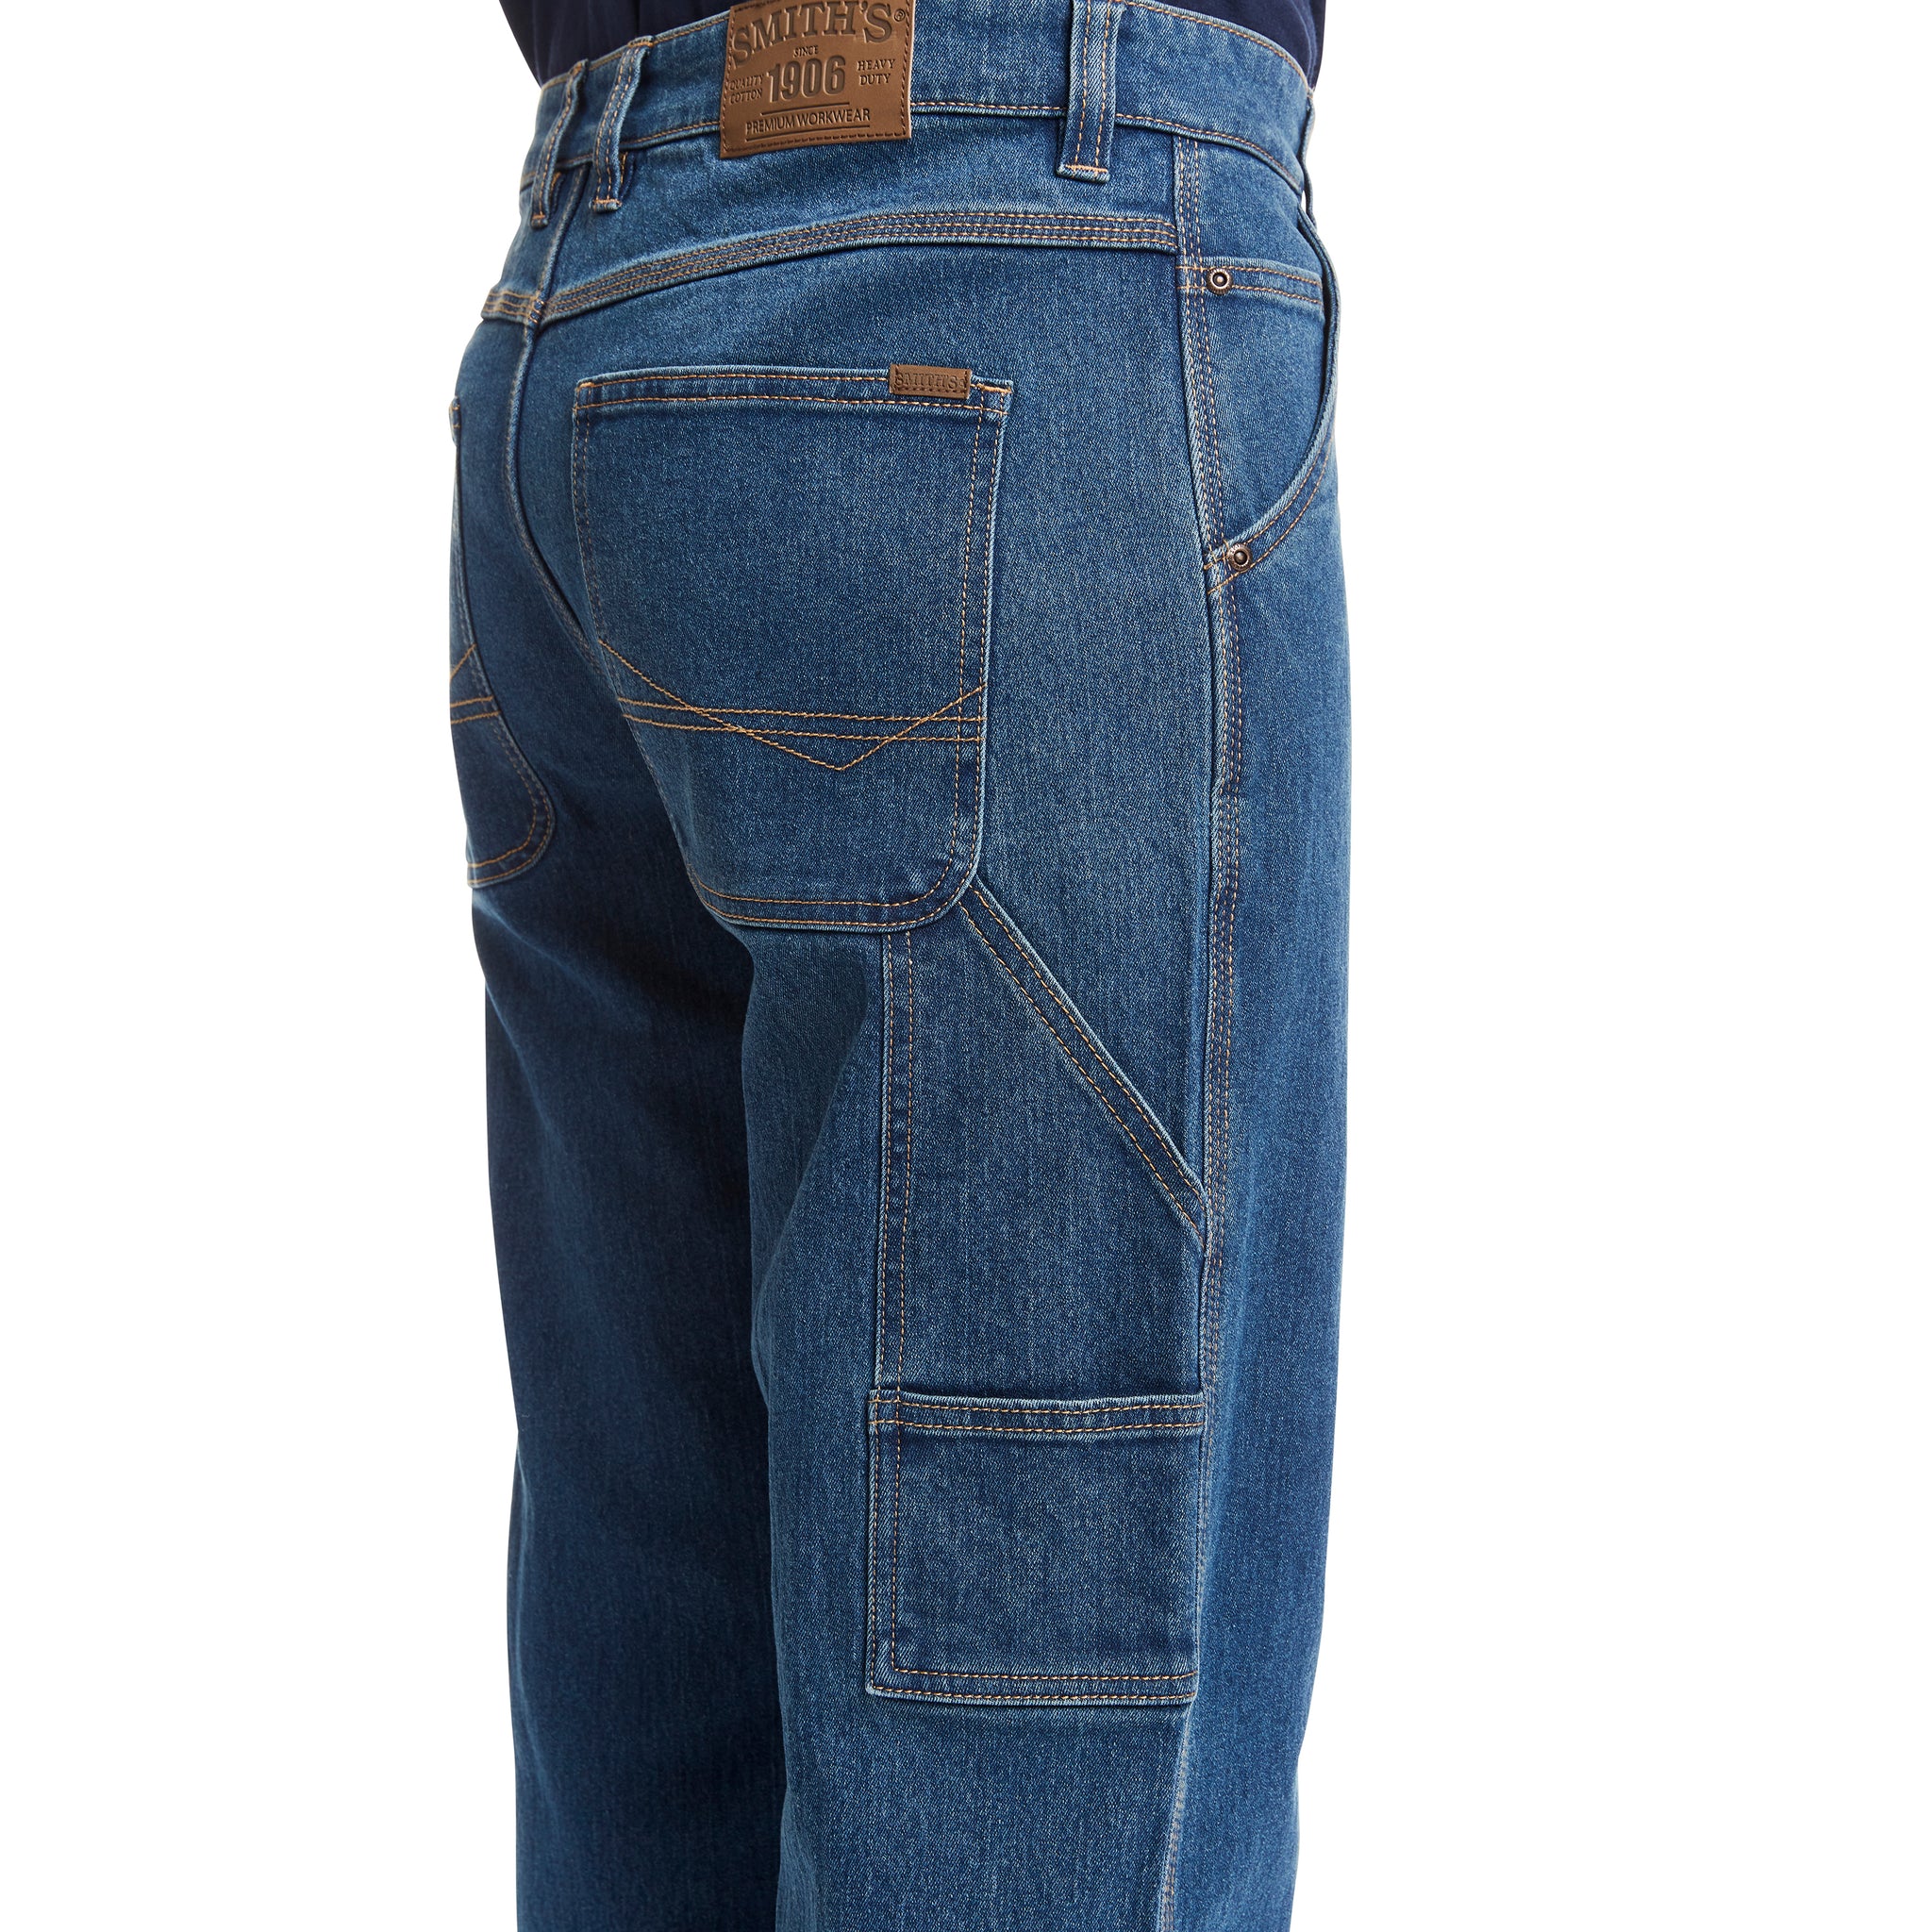 STRETCH RELAXED FIT CARPENTER JEAN